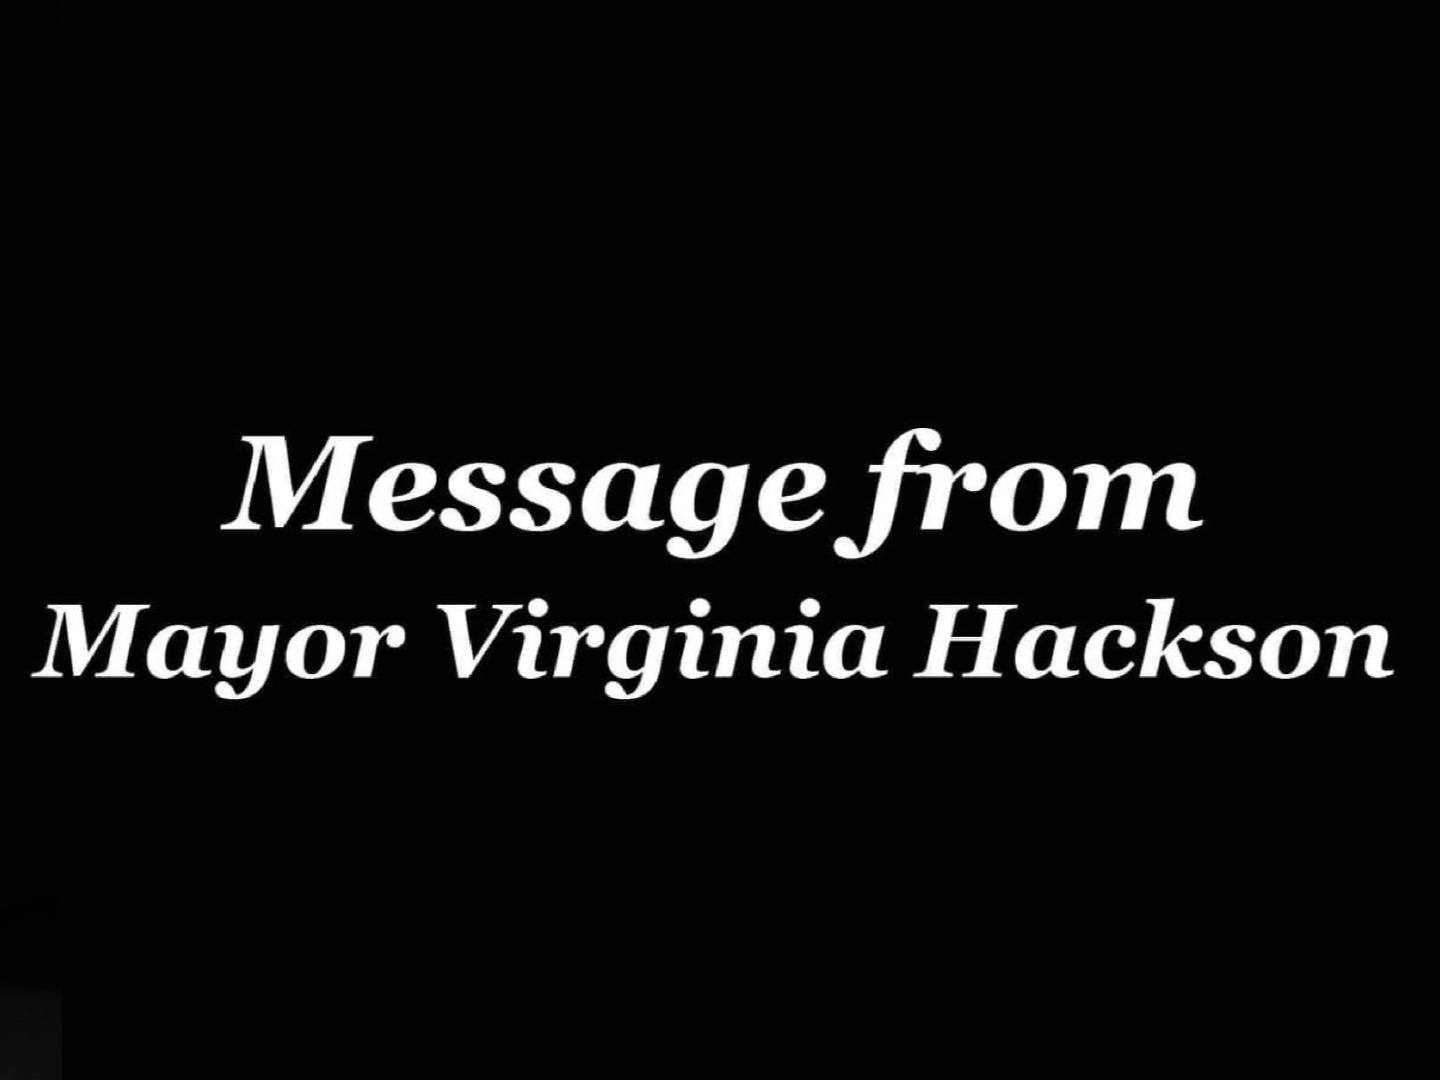 Messages from Mayor Virginia Hackson